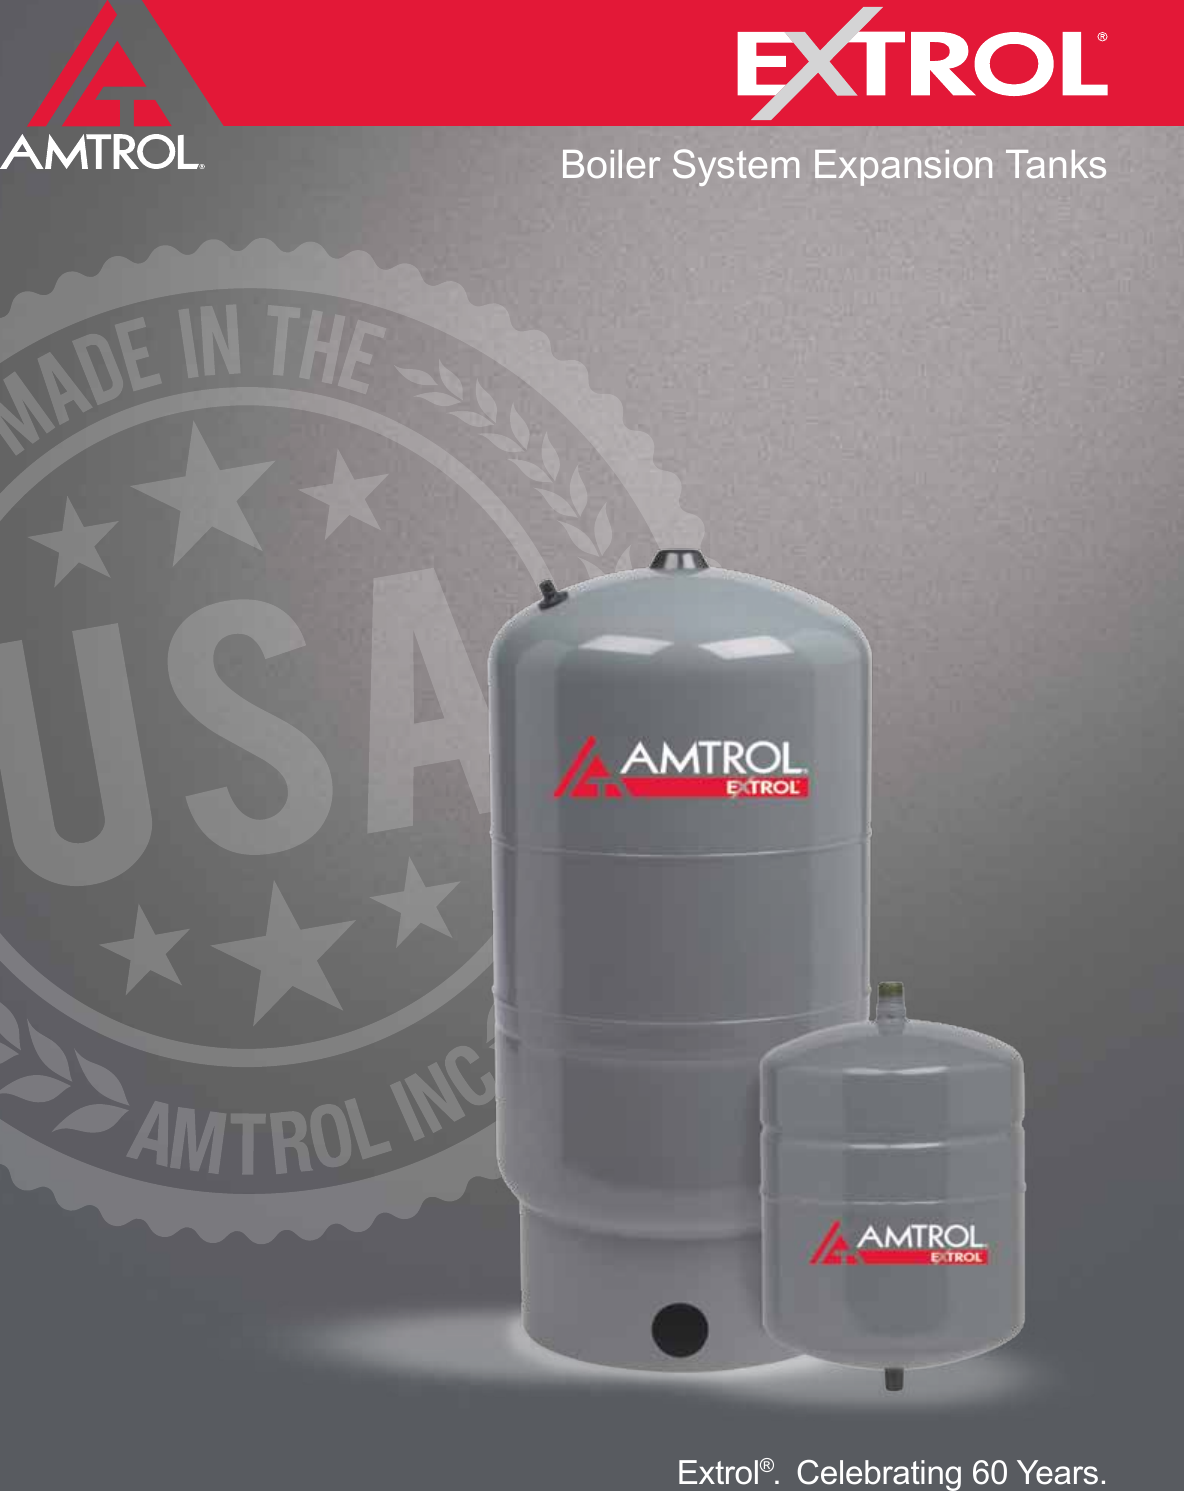 Page 1 of 8 - 551519 1 Amtrol FT-109 Fill-Trol Expansion Tank Brochure